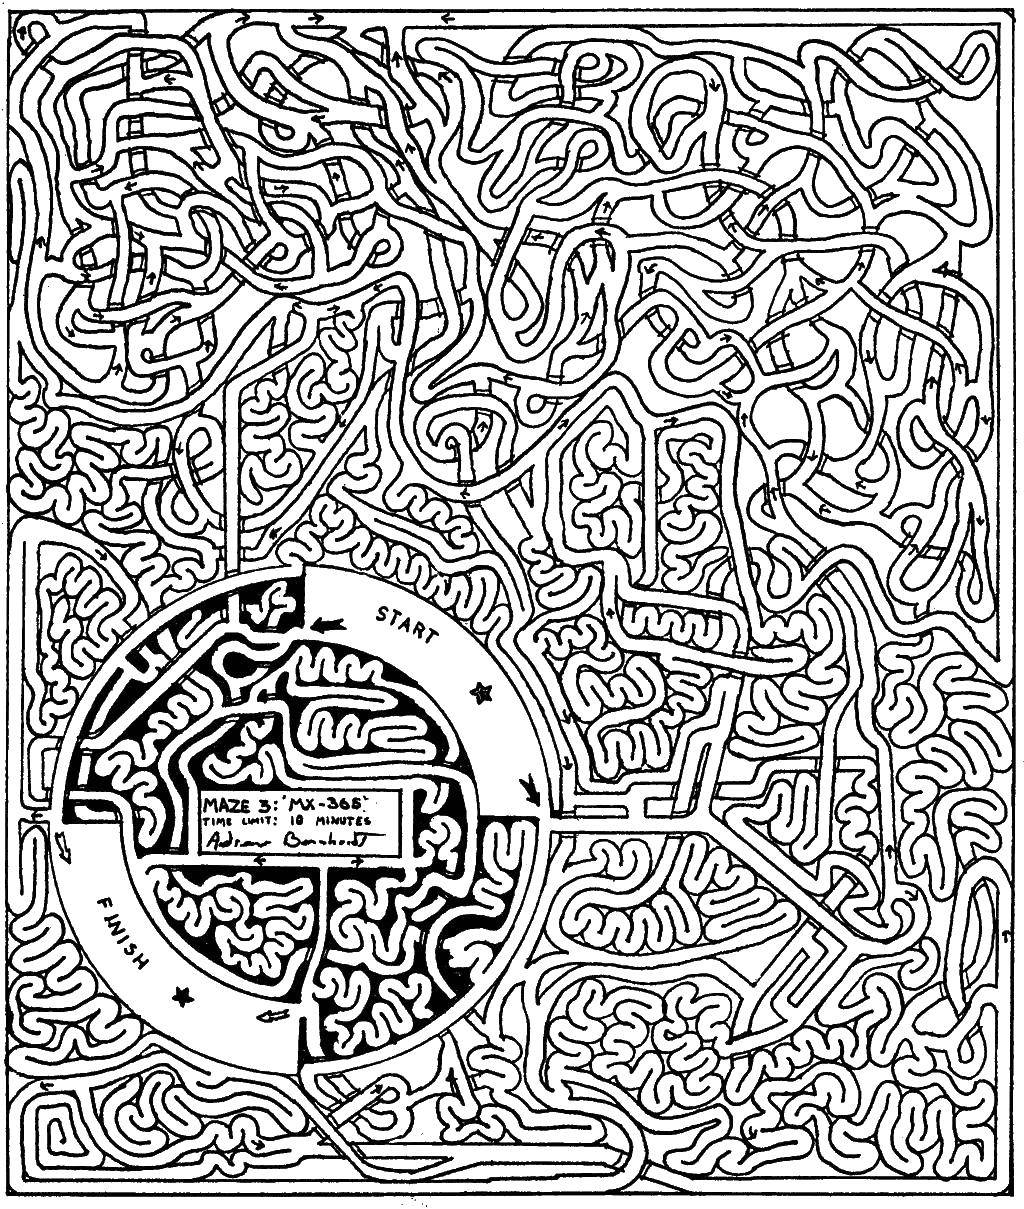 Coloring The most complicated maze. Category Mazes. Tags:  Maze, logic.